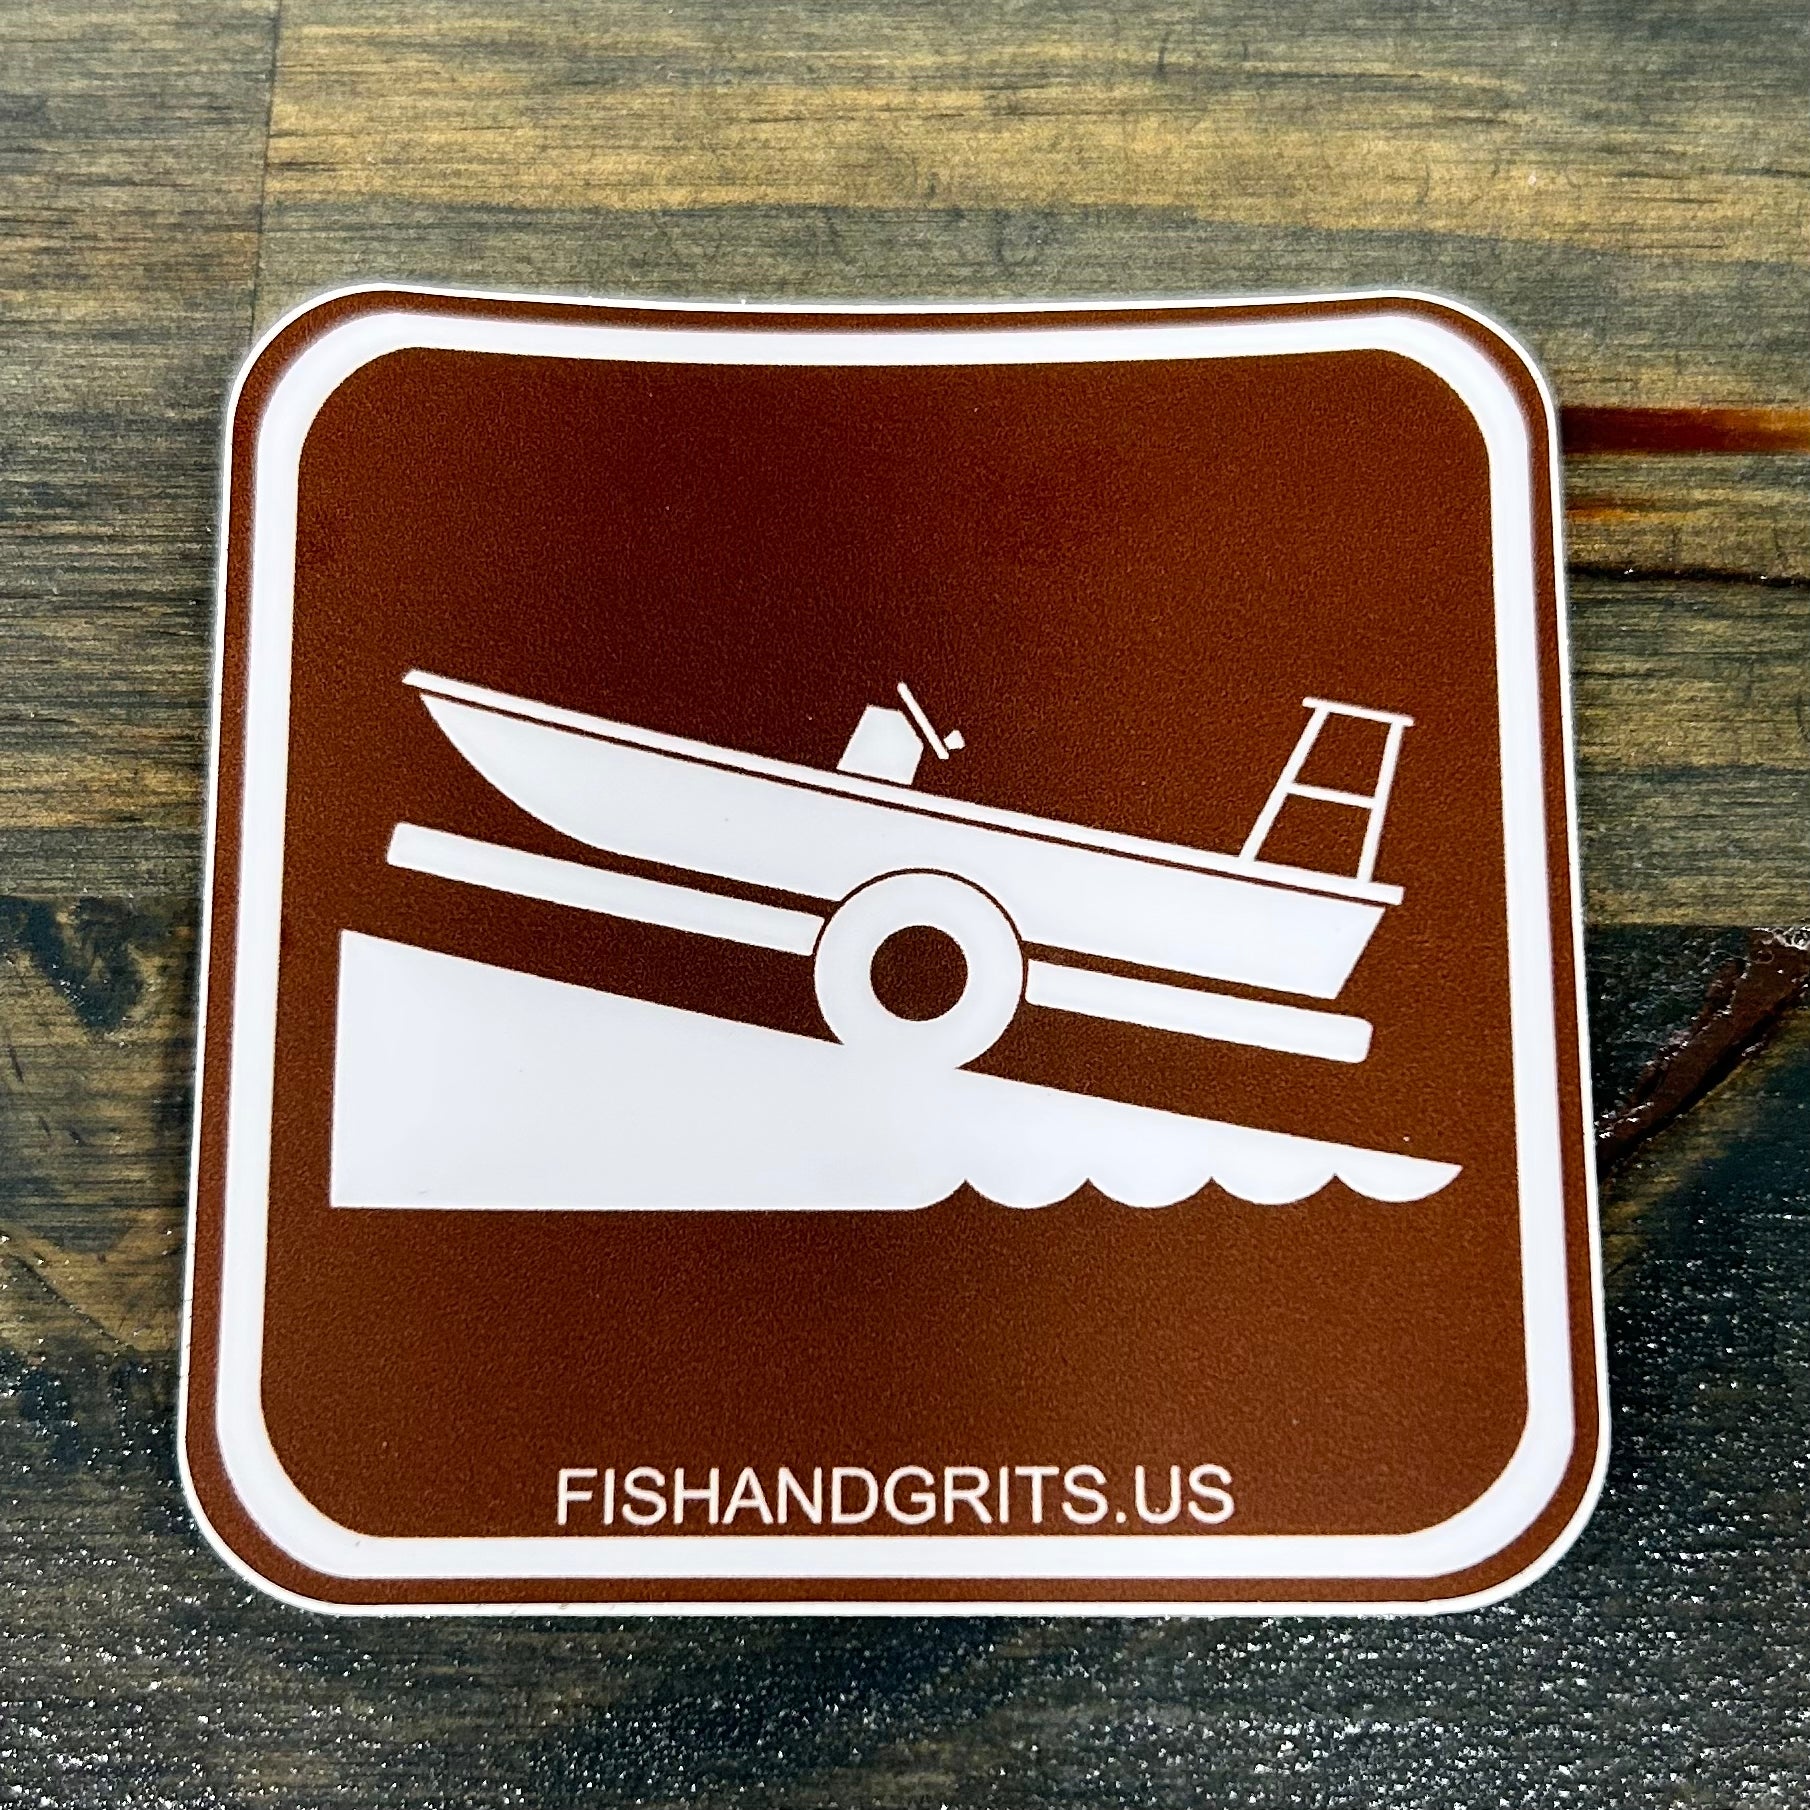 Fish and Grits “boat ramp” sticker